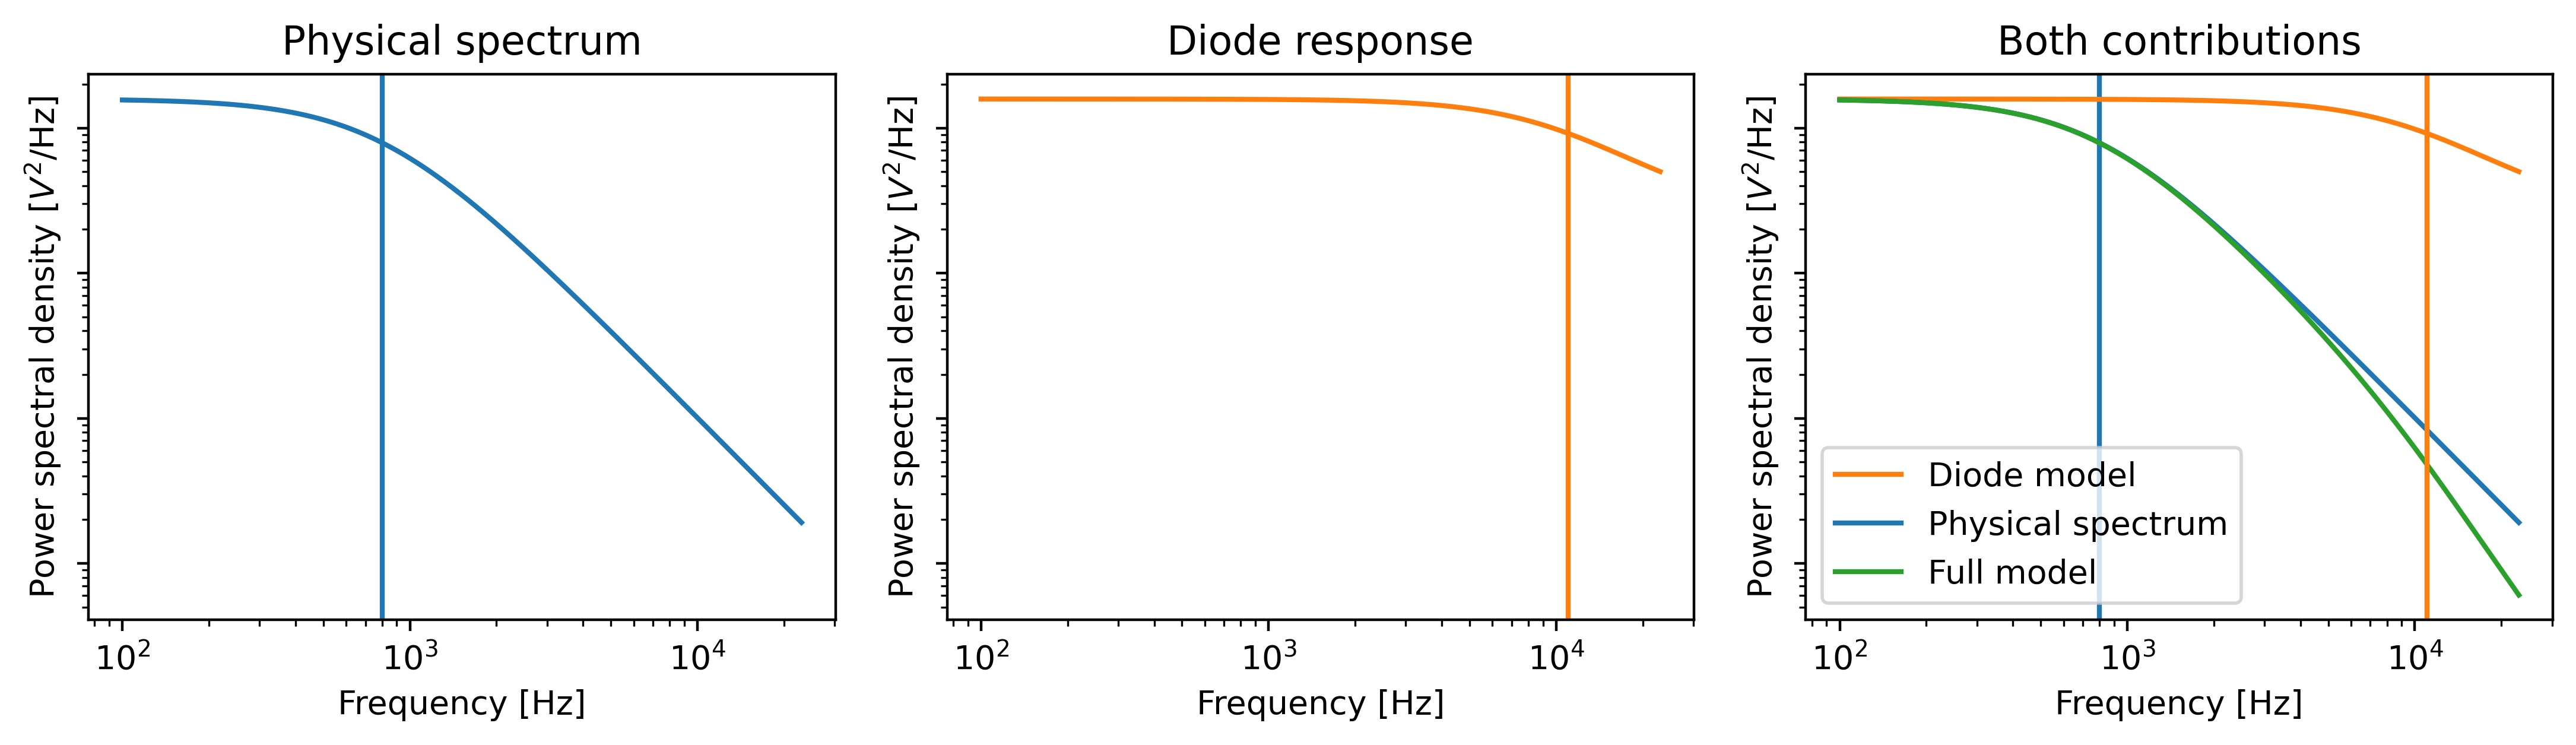 ../_images/diode_filtering.png